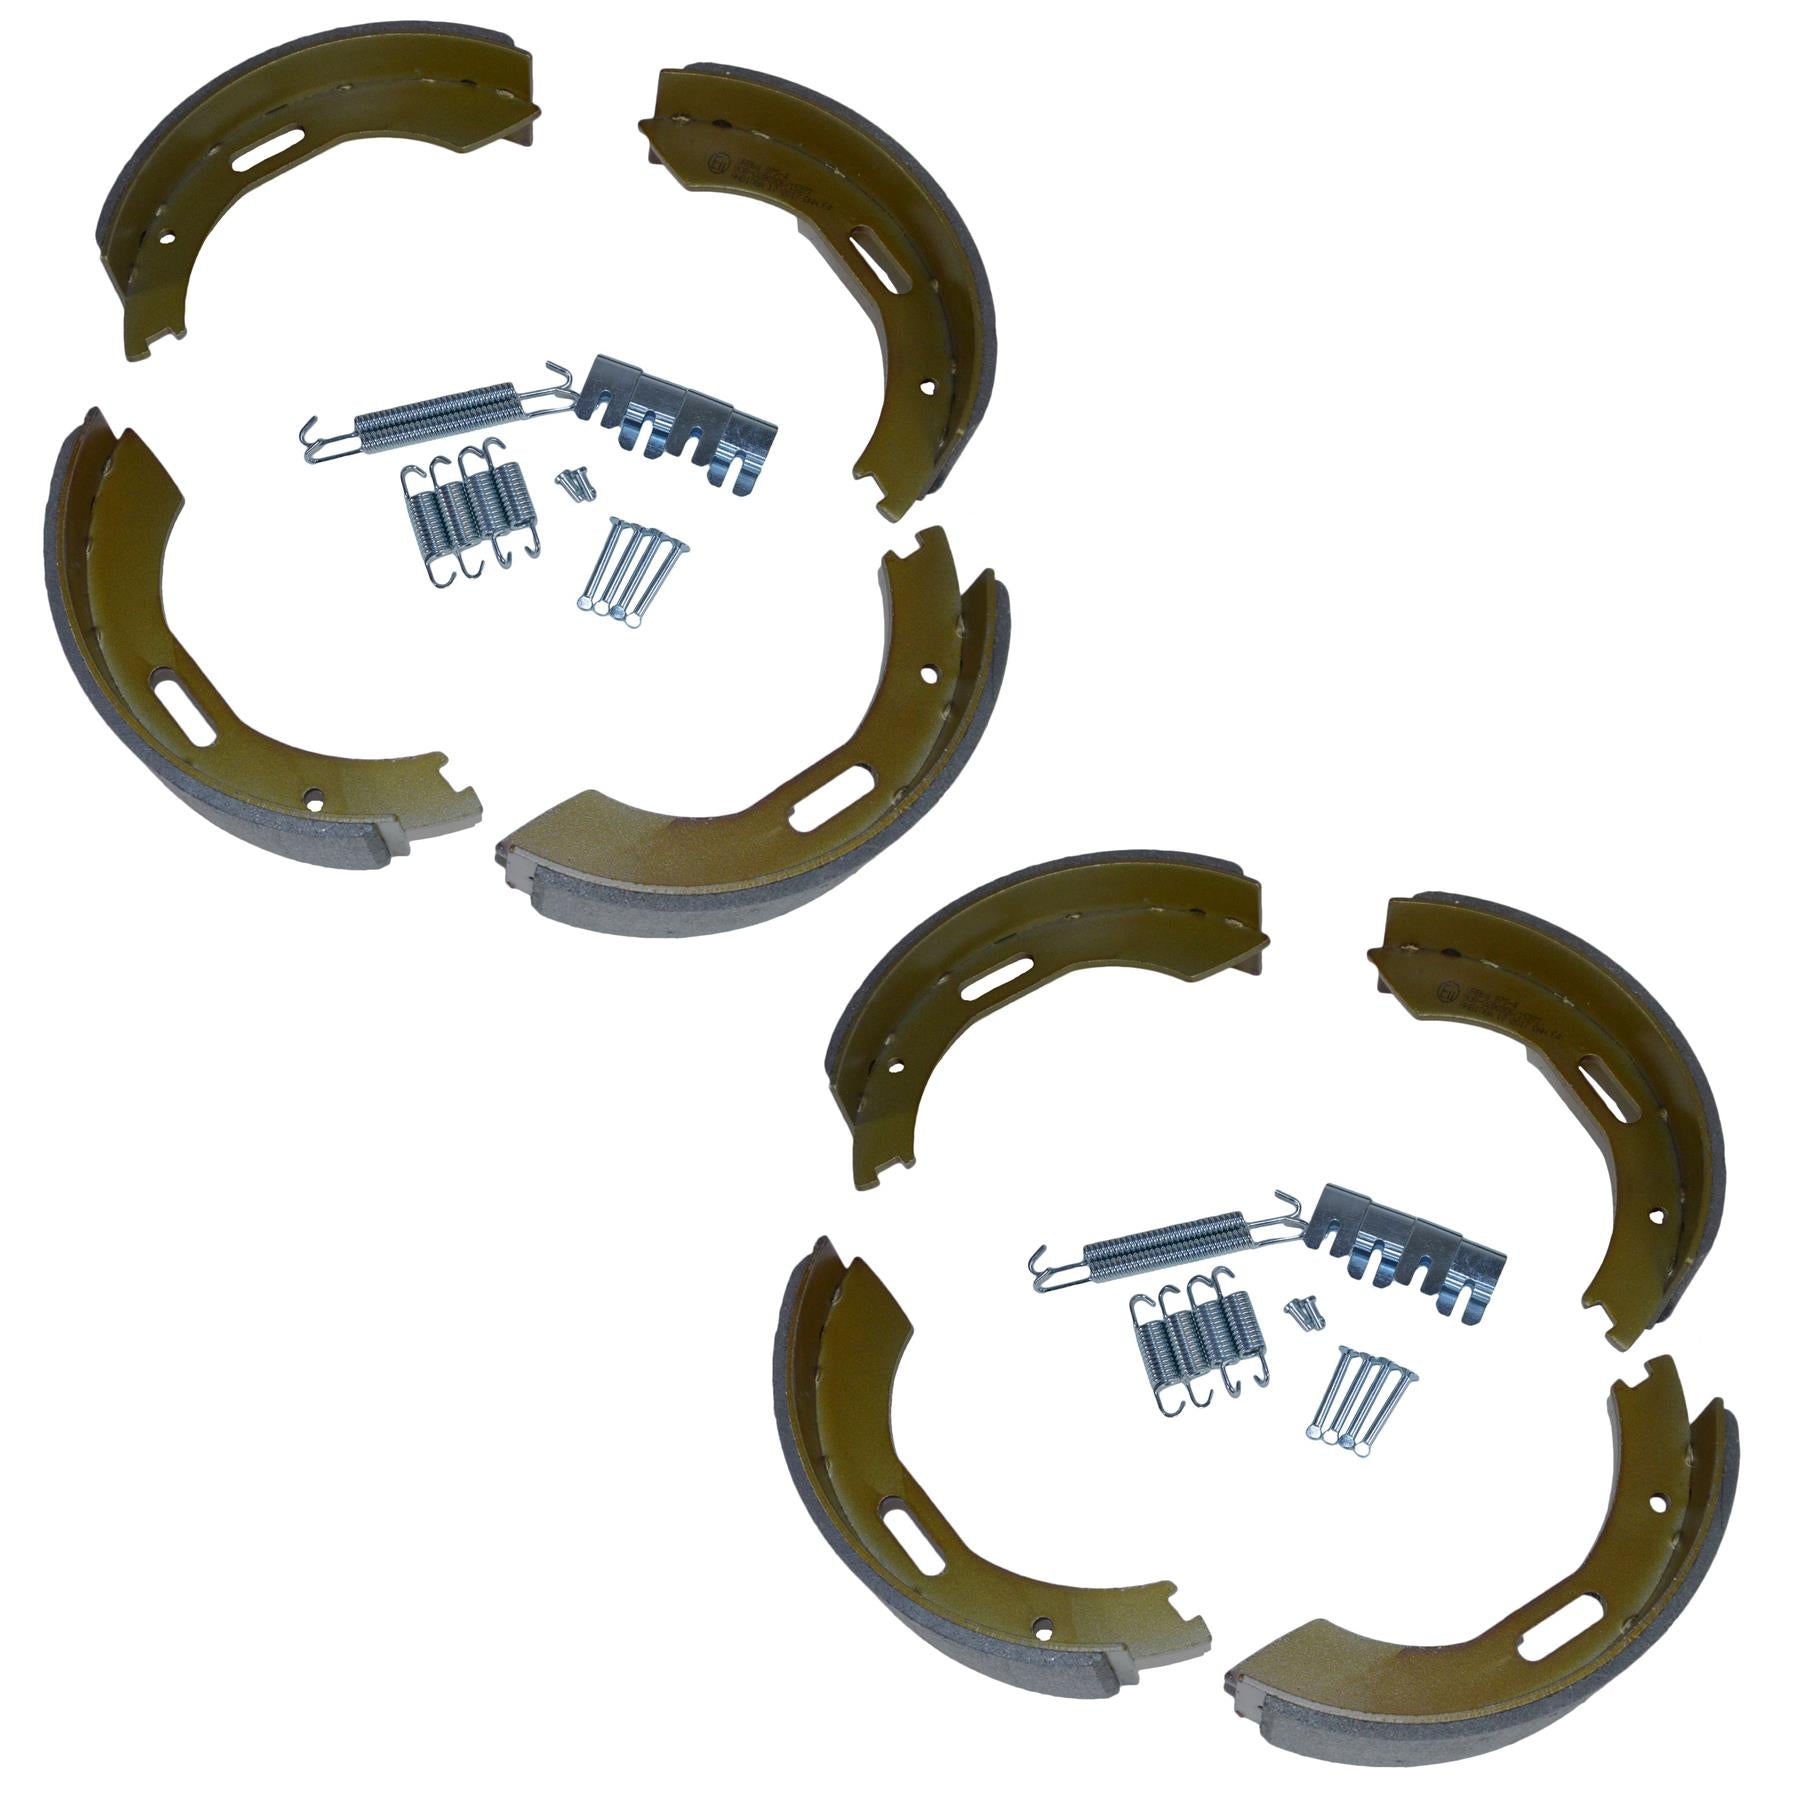 200 x 50mm Trailer Caravan Brake Shoes for BPW Style Axles For Brake Drums